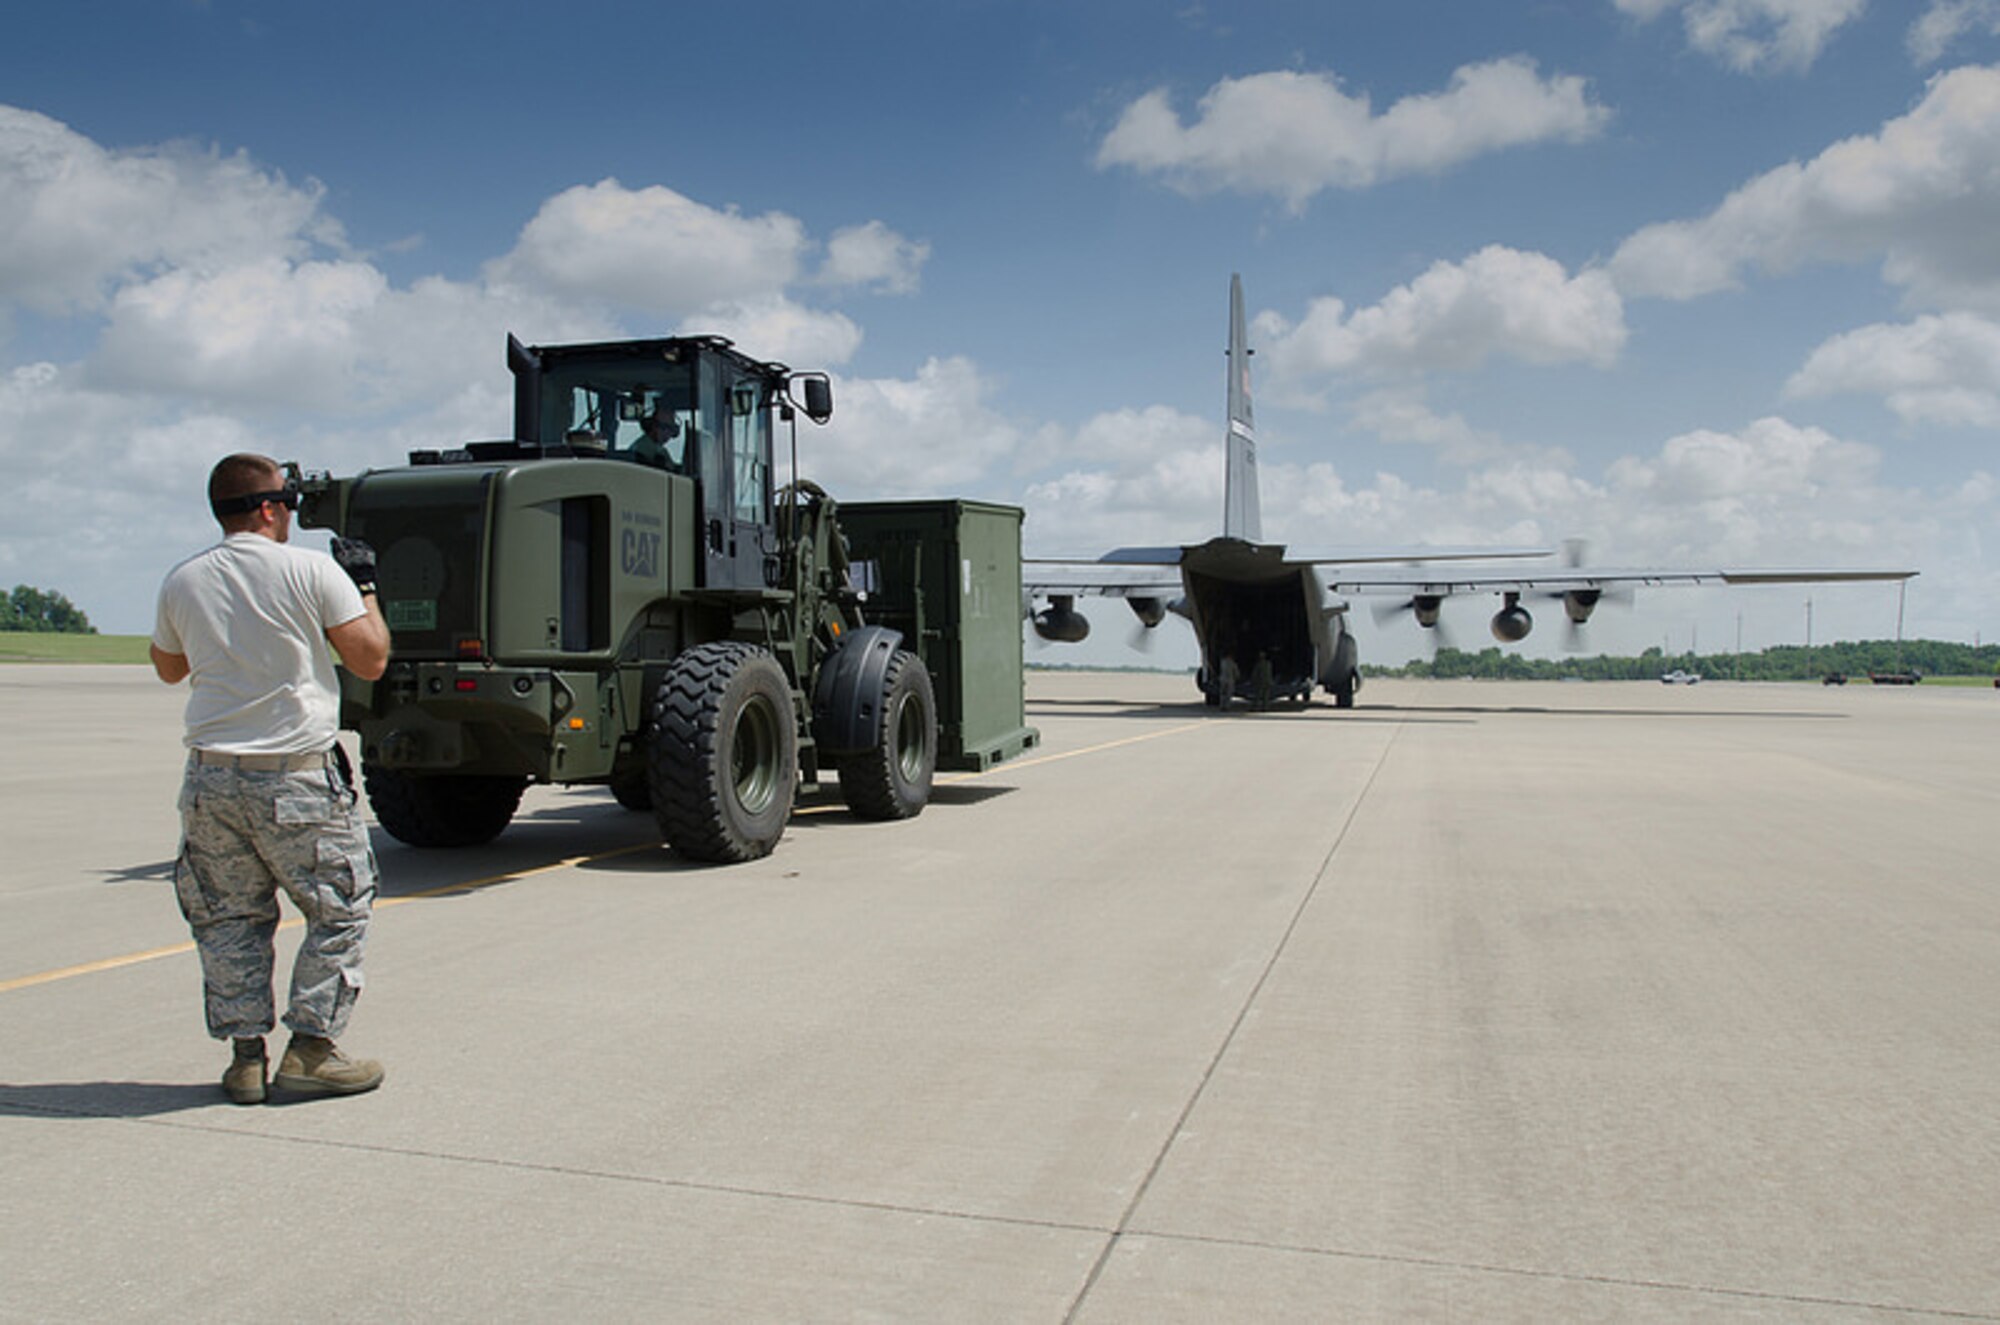 Airmen from the Kentucky Air National Guard’s 123rd Contingency Response Group unload a Kentucky Air Guard C-130 Hercules during Capstone '14, a homeland earthquake-response exercise at Fort Campbell, Ky., on June 17, 2014. The 123rd CRG is joining with the U.S. Army’s 688th Rapid Port Opening Element to operate a Joint Task Force-Port Opening here from June 16 to 19, 2014. (U.S. Air National Guard photo by Master Sgt. Phil Speck)